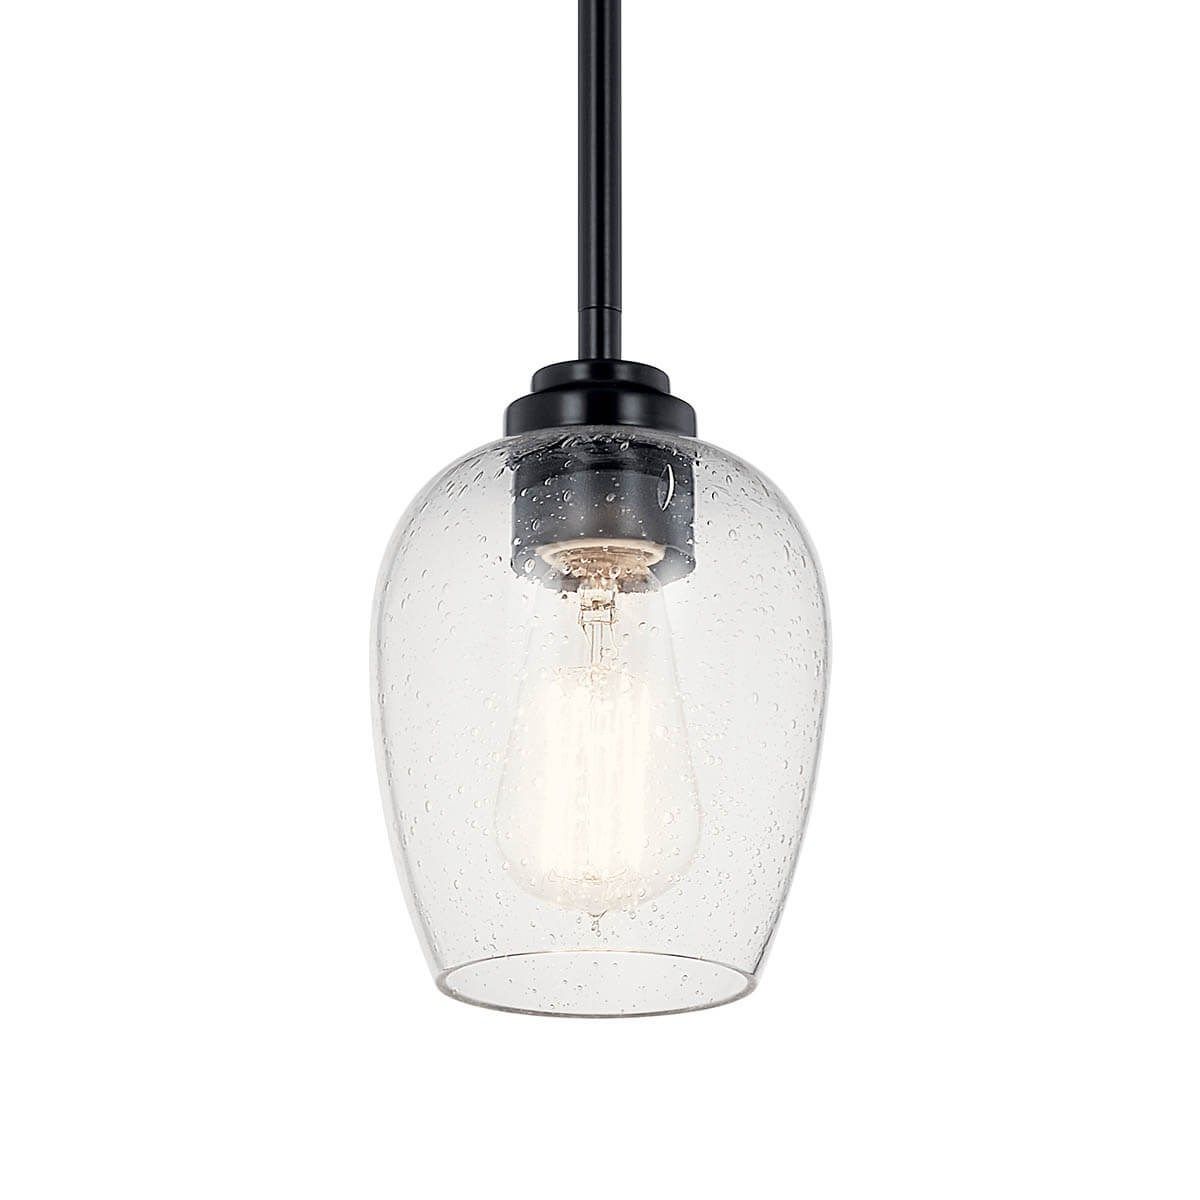 Valserrano 5 in. Pendant Light with clear seeded glass